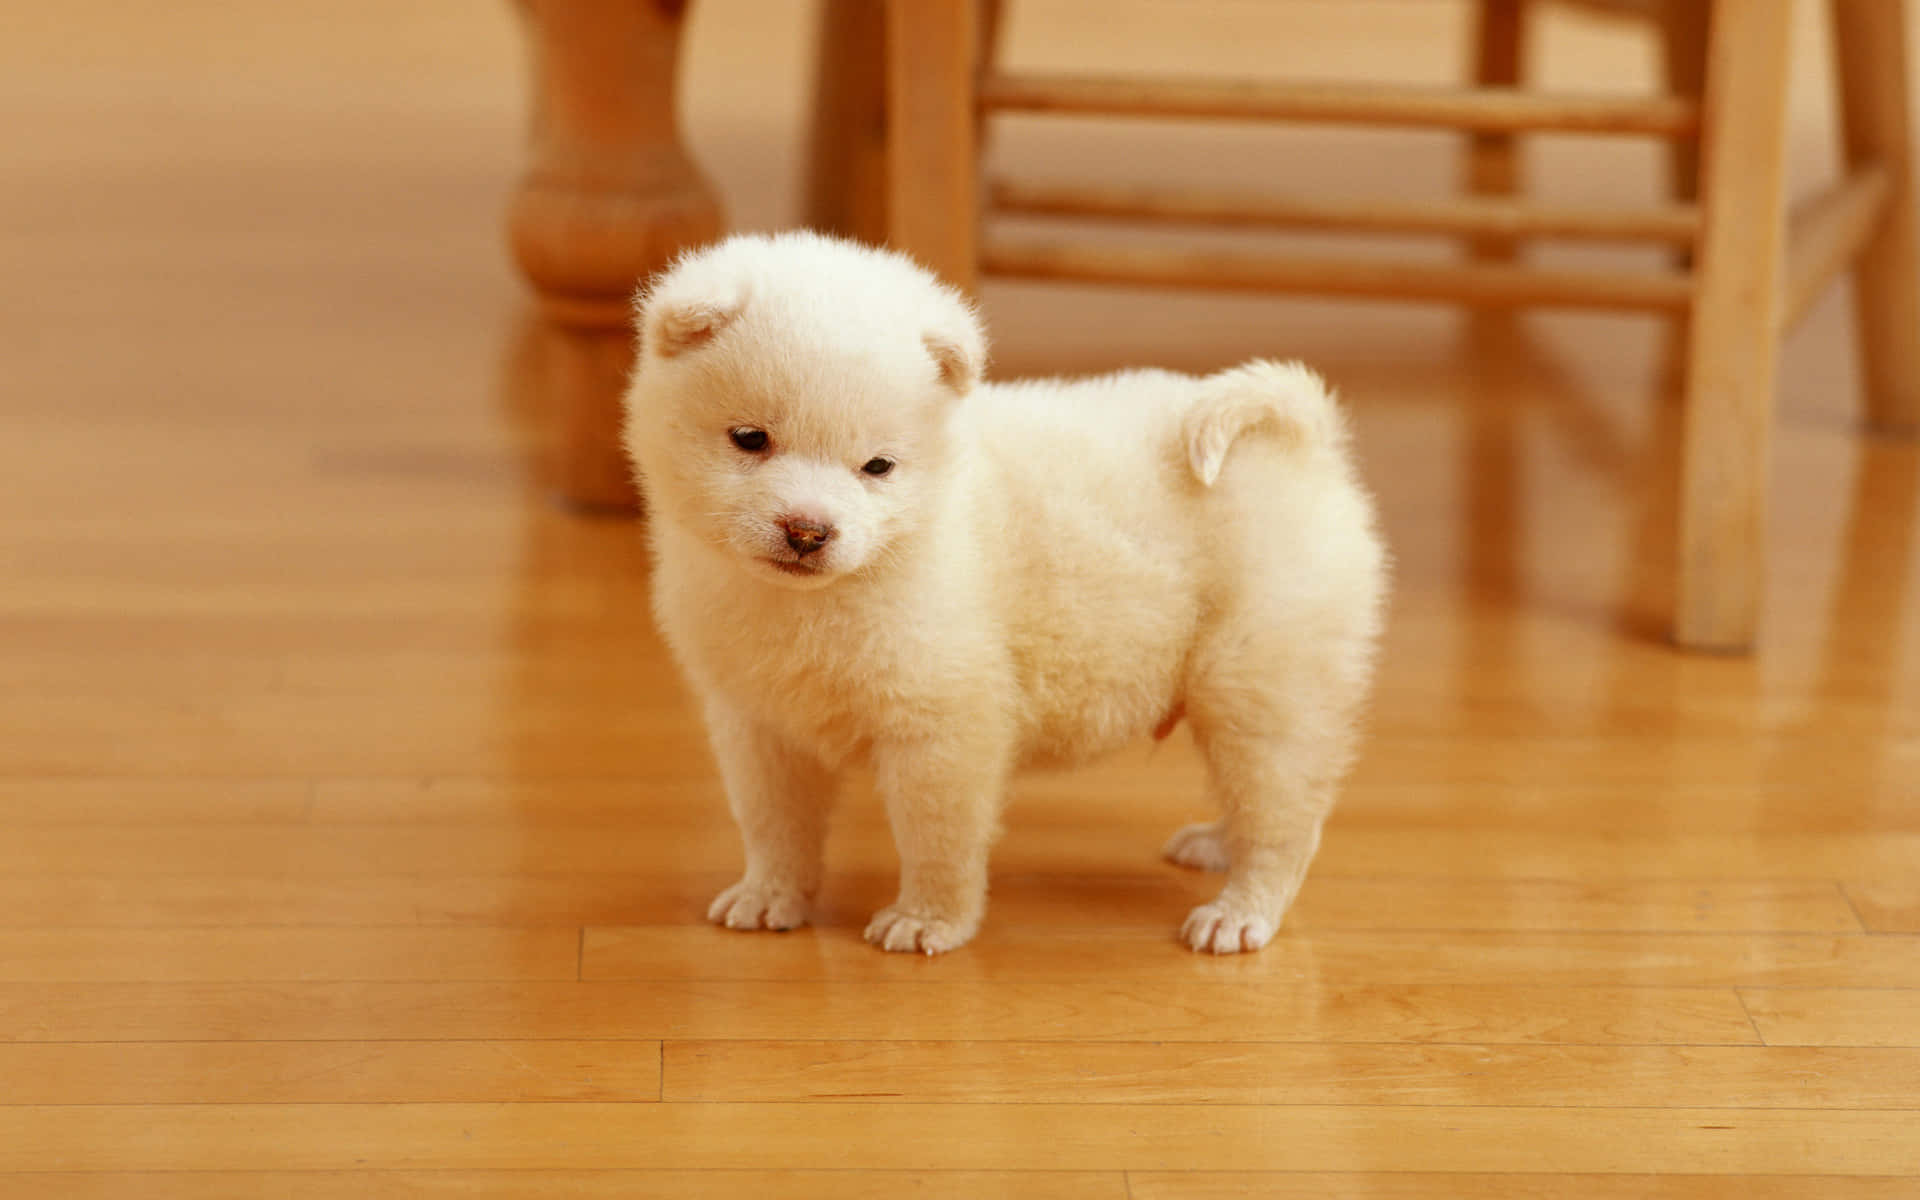 Cute Pets White Dog On Wooden Floor Under Chair Picture